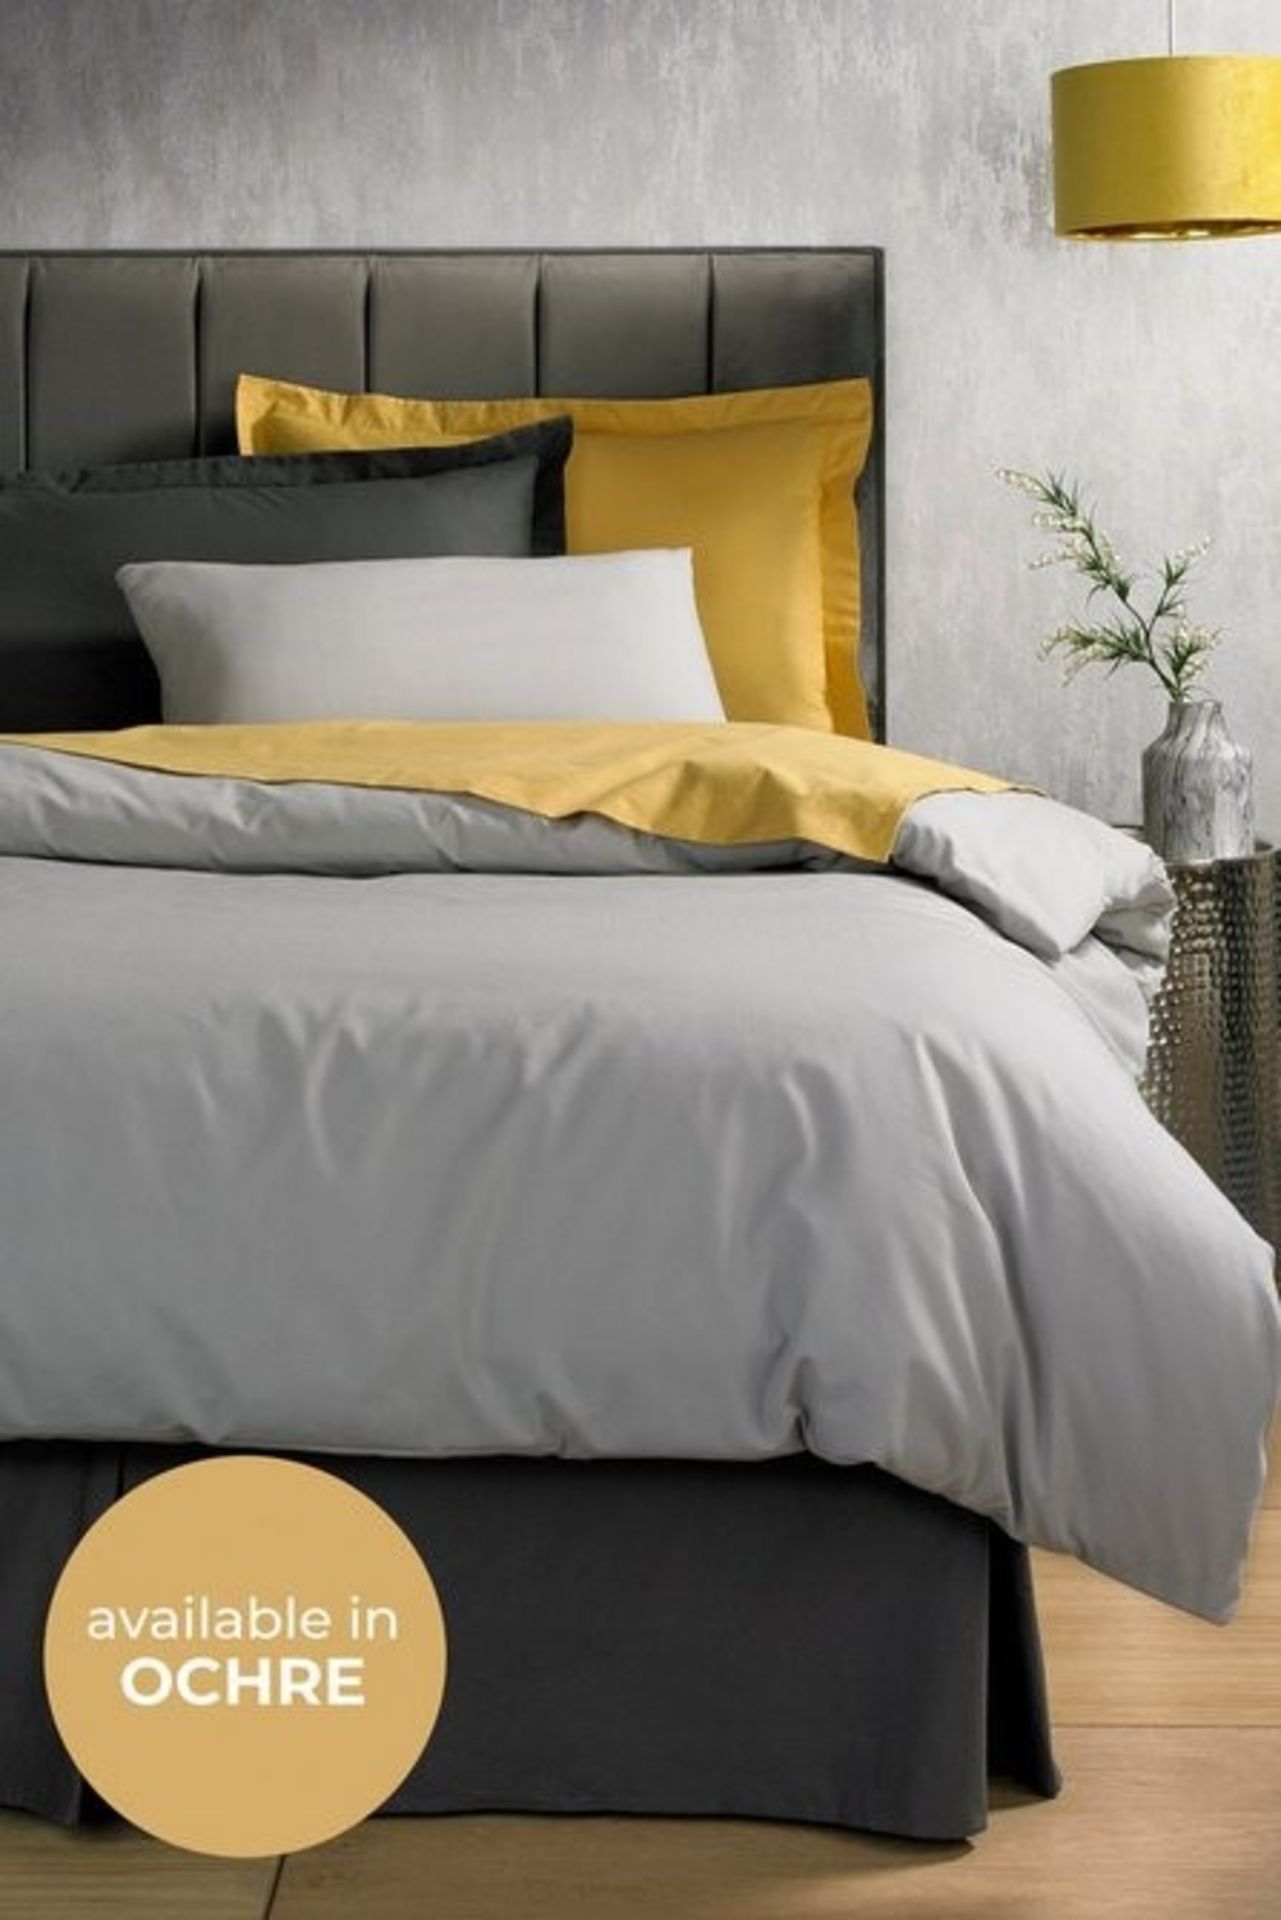 1 AS NEW BAGGED SILENT NIGHT ULTIMATE COMFORT PERCALE PLAIN DYED FITTED DOUBLE SHEET IN OCHRE (